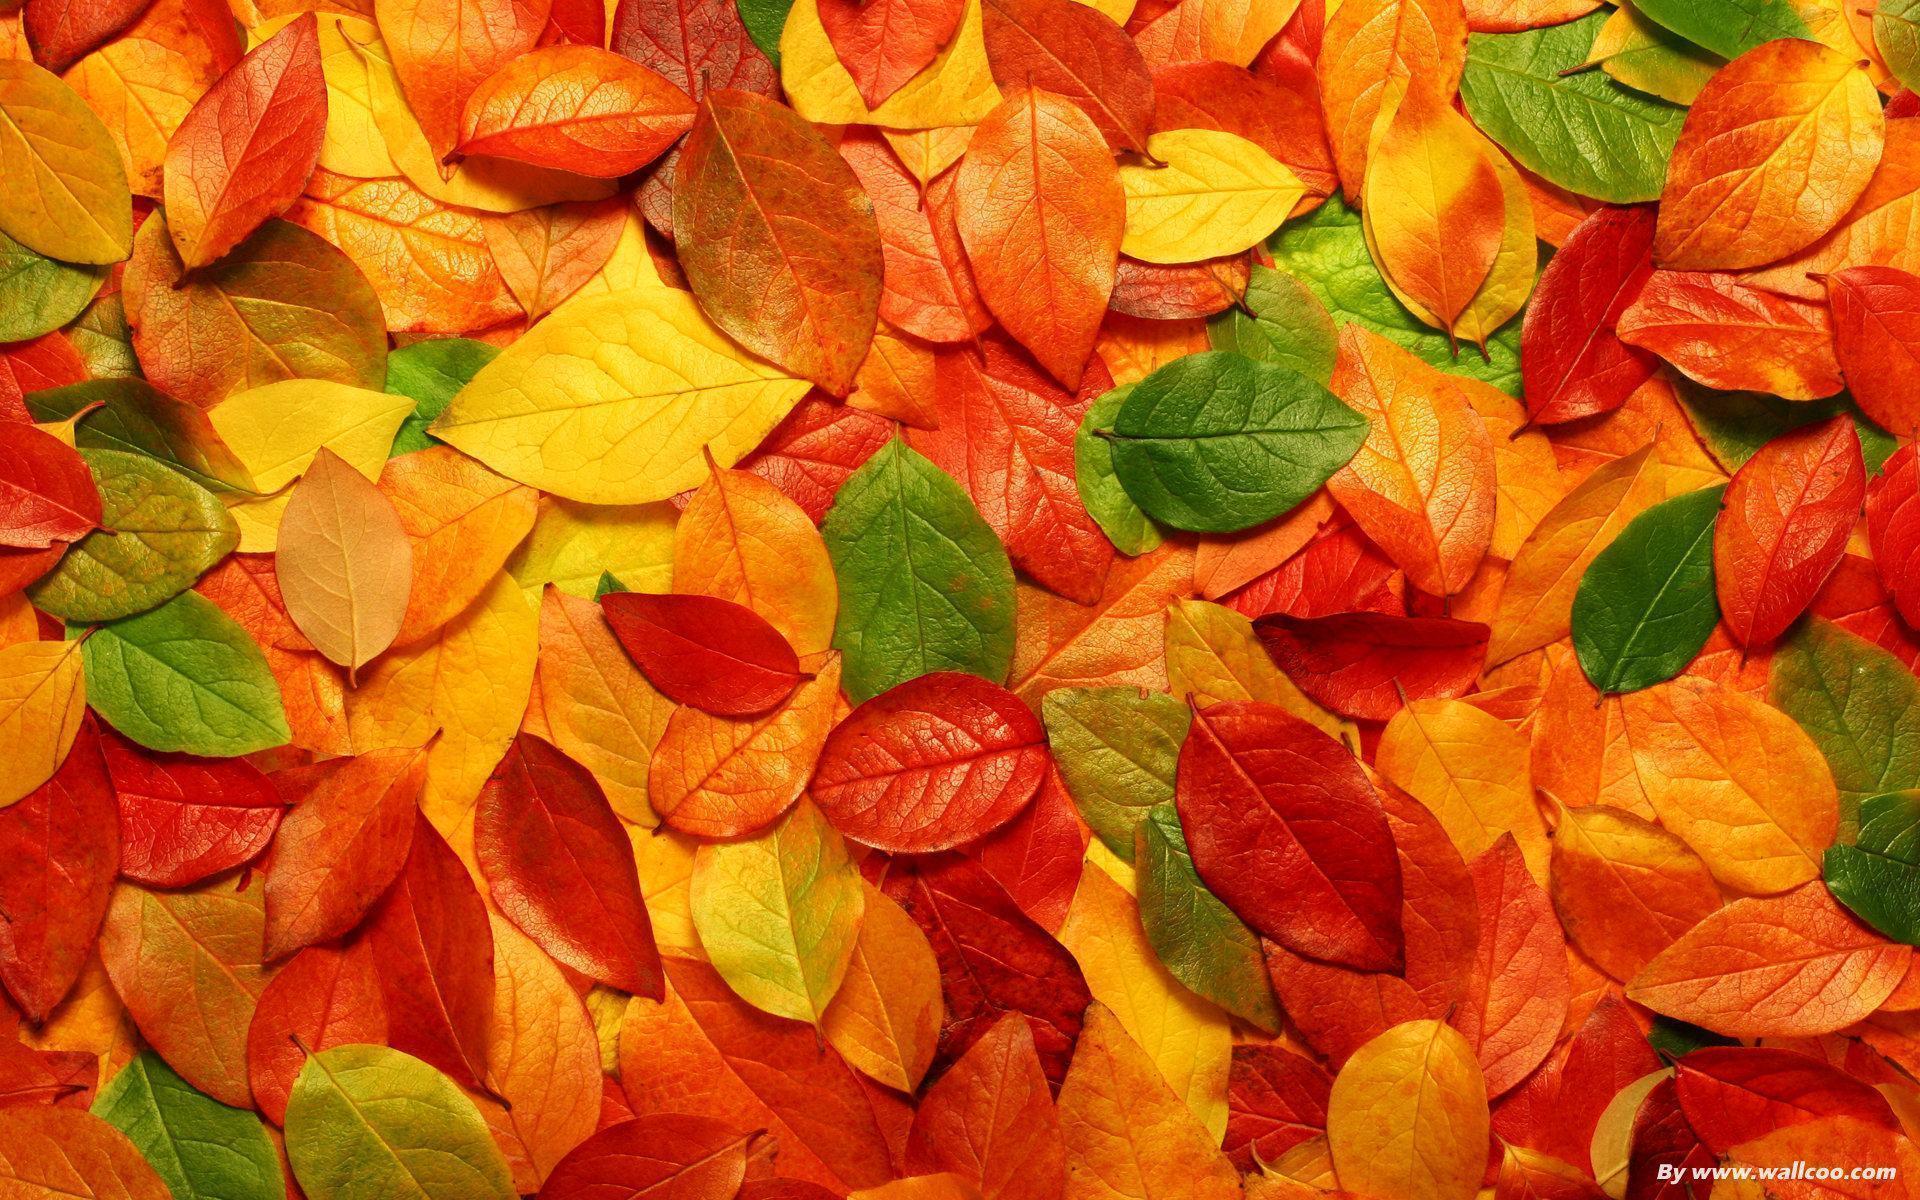 Wallpaper Red Leaf Beautiful Leaves Nature 1920x1200 HD Wallpape